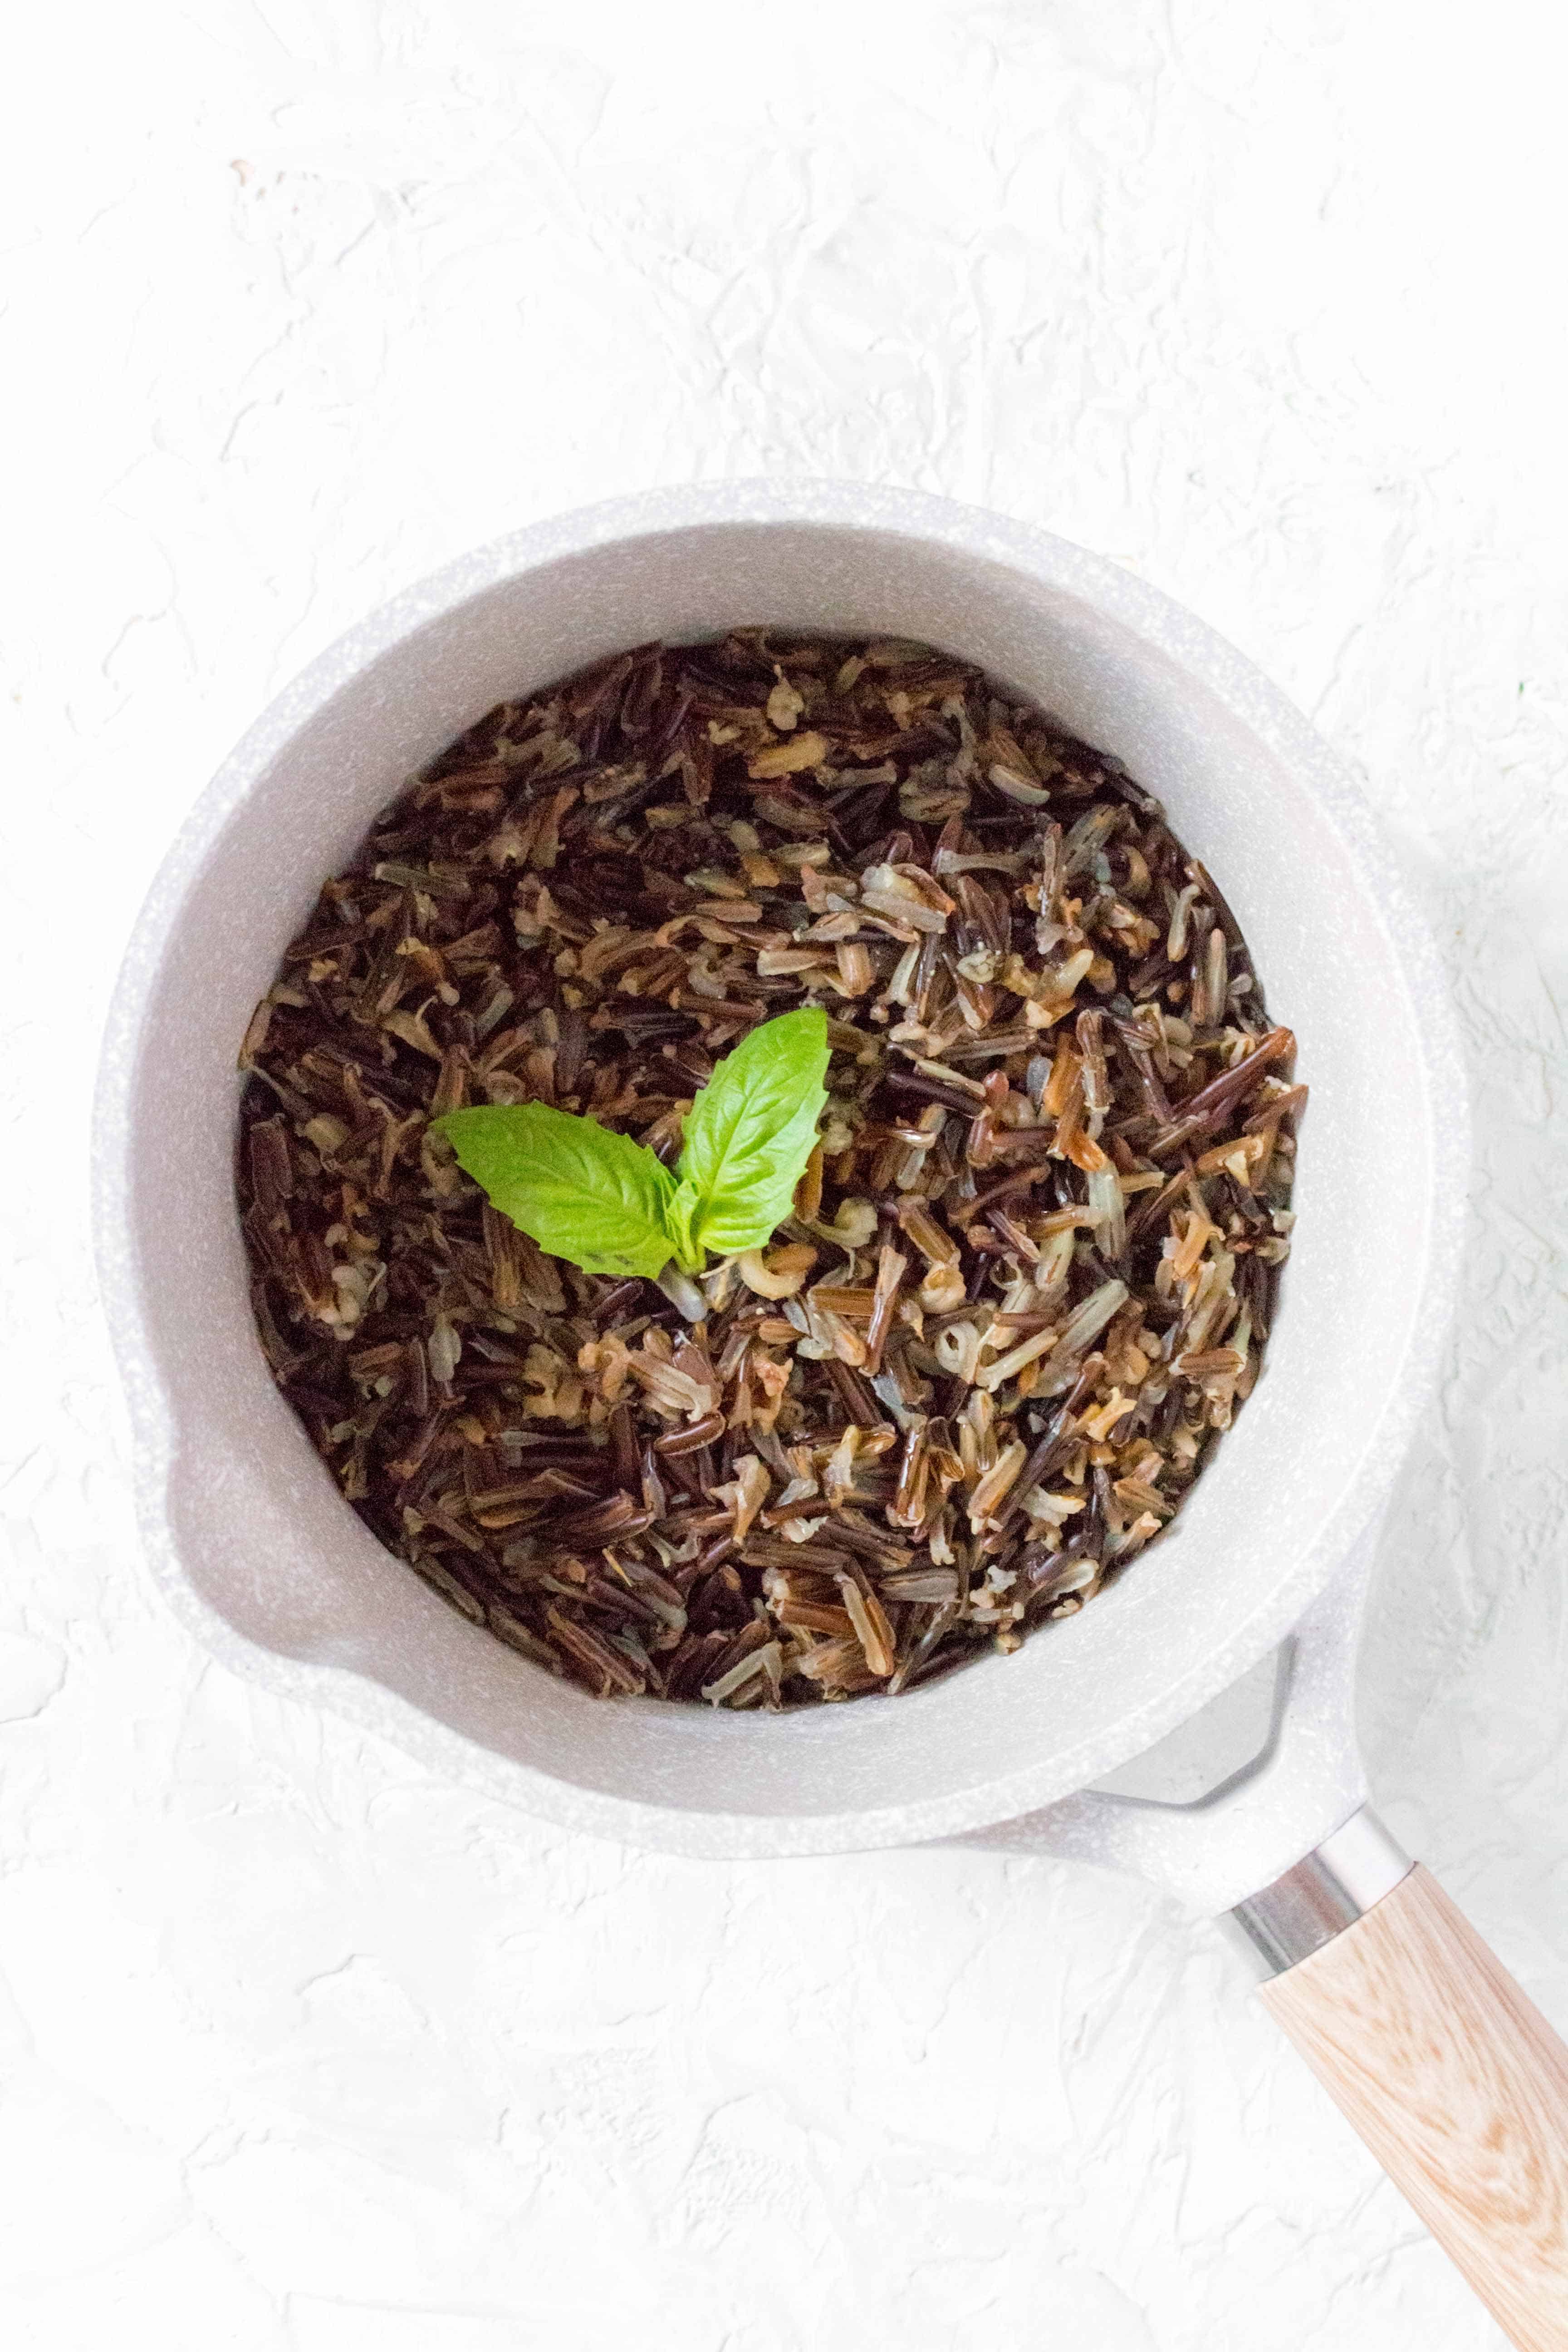 Full of fibre and protein, you're going to want to add wild rice to your meals! Here's how to cook wild rice perfectly on the stovetop!